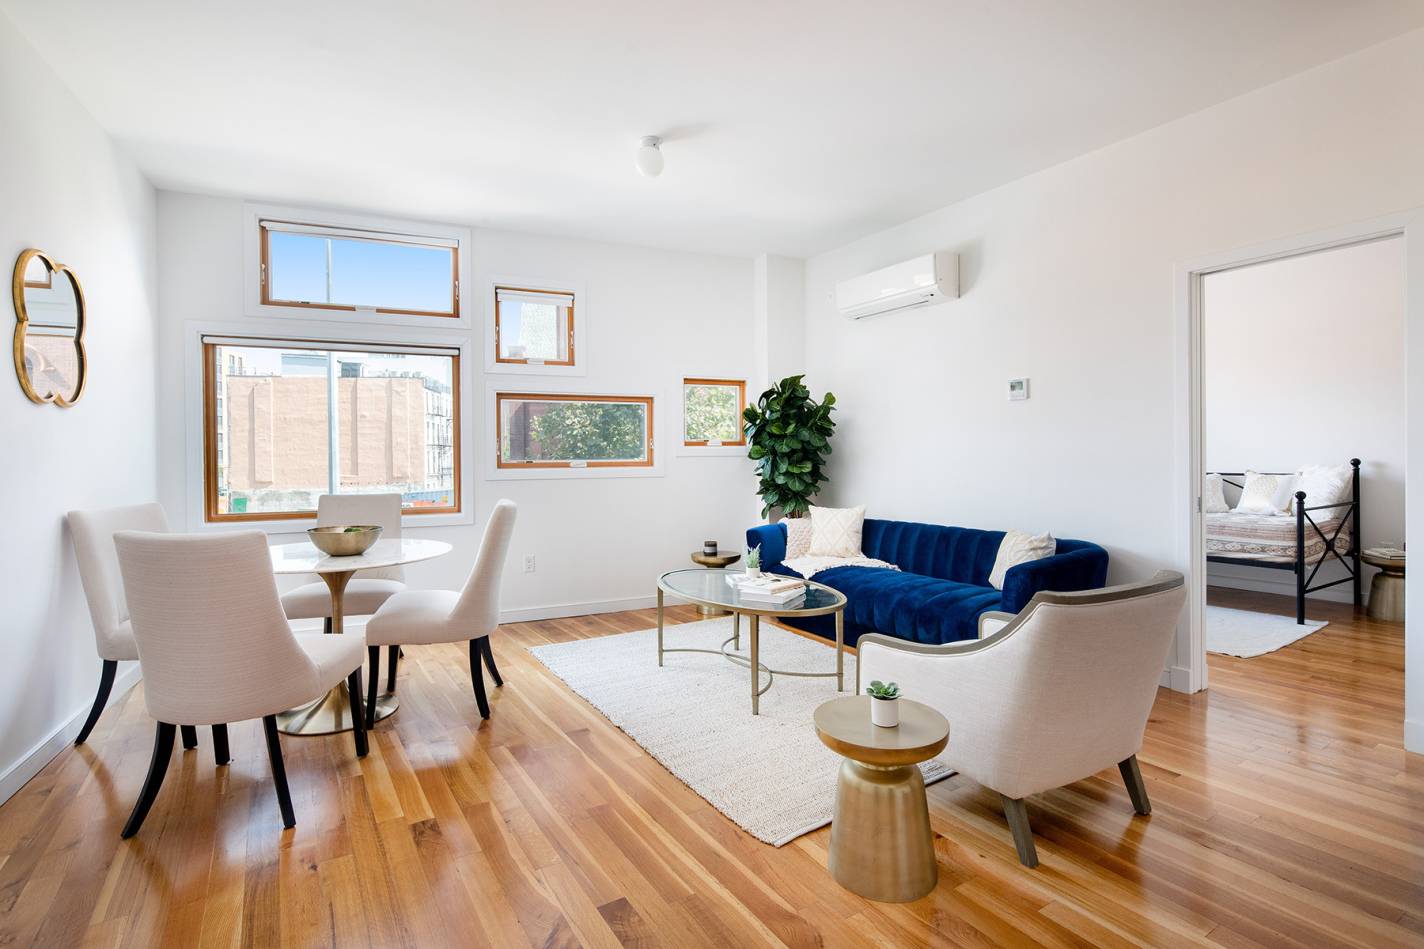 Bask in gorgeous natural light and impeccable design in this fantastic two bedroom, two and a half bathroom home in an outstanding Clinton Hill condominium.